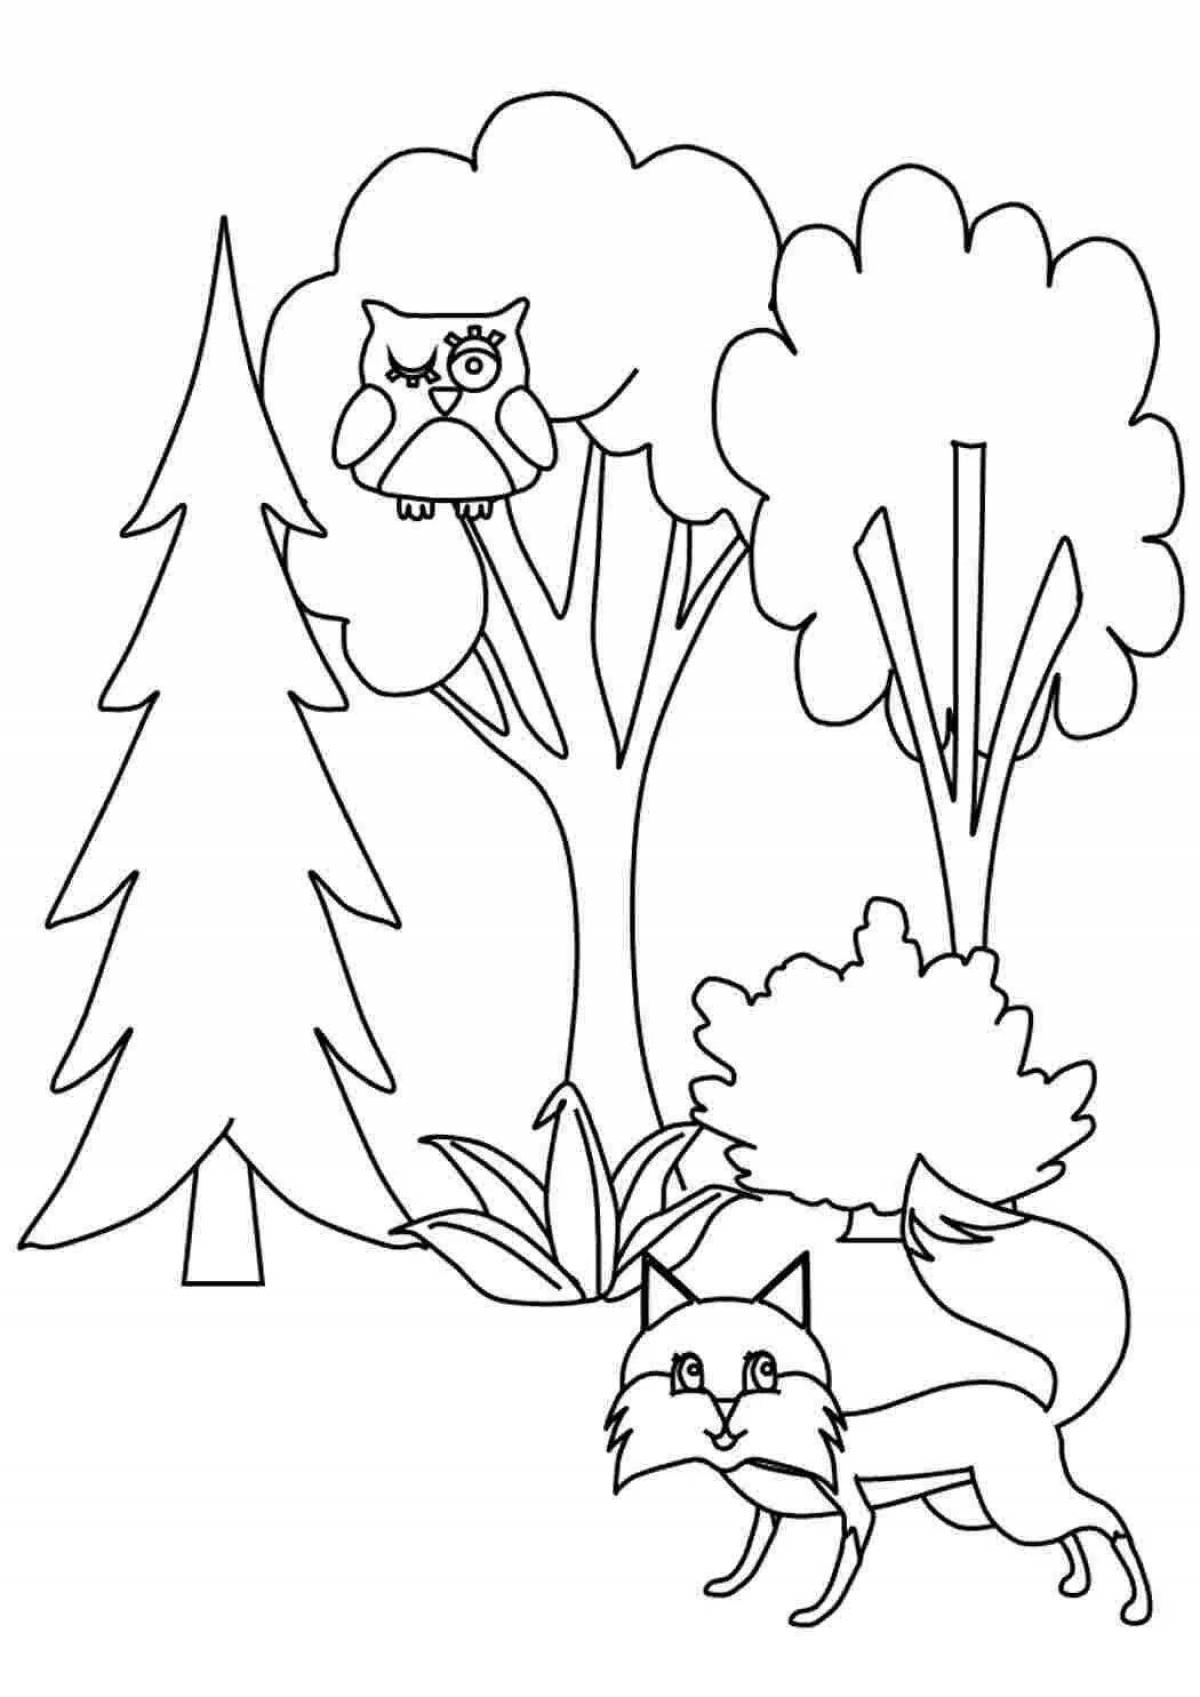 Fun coloring forest